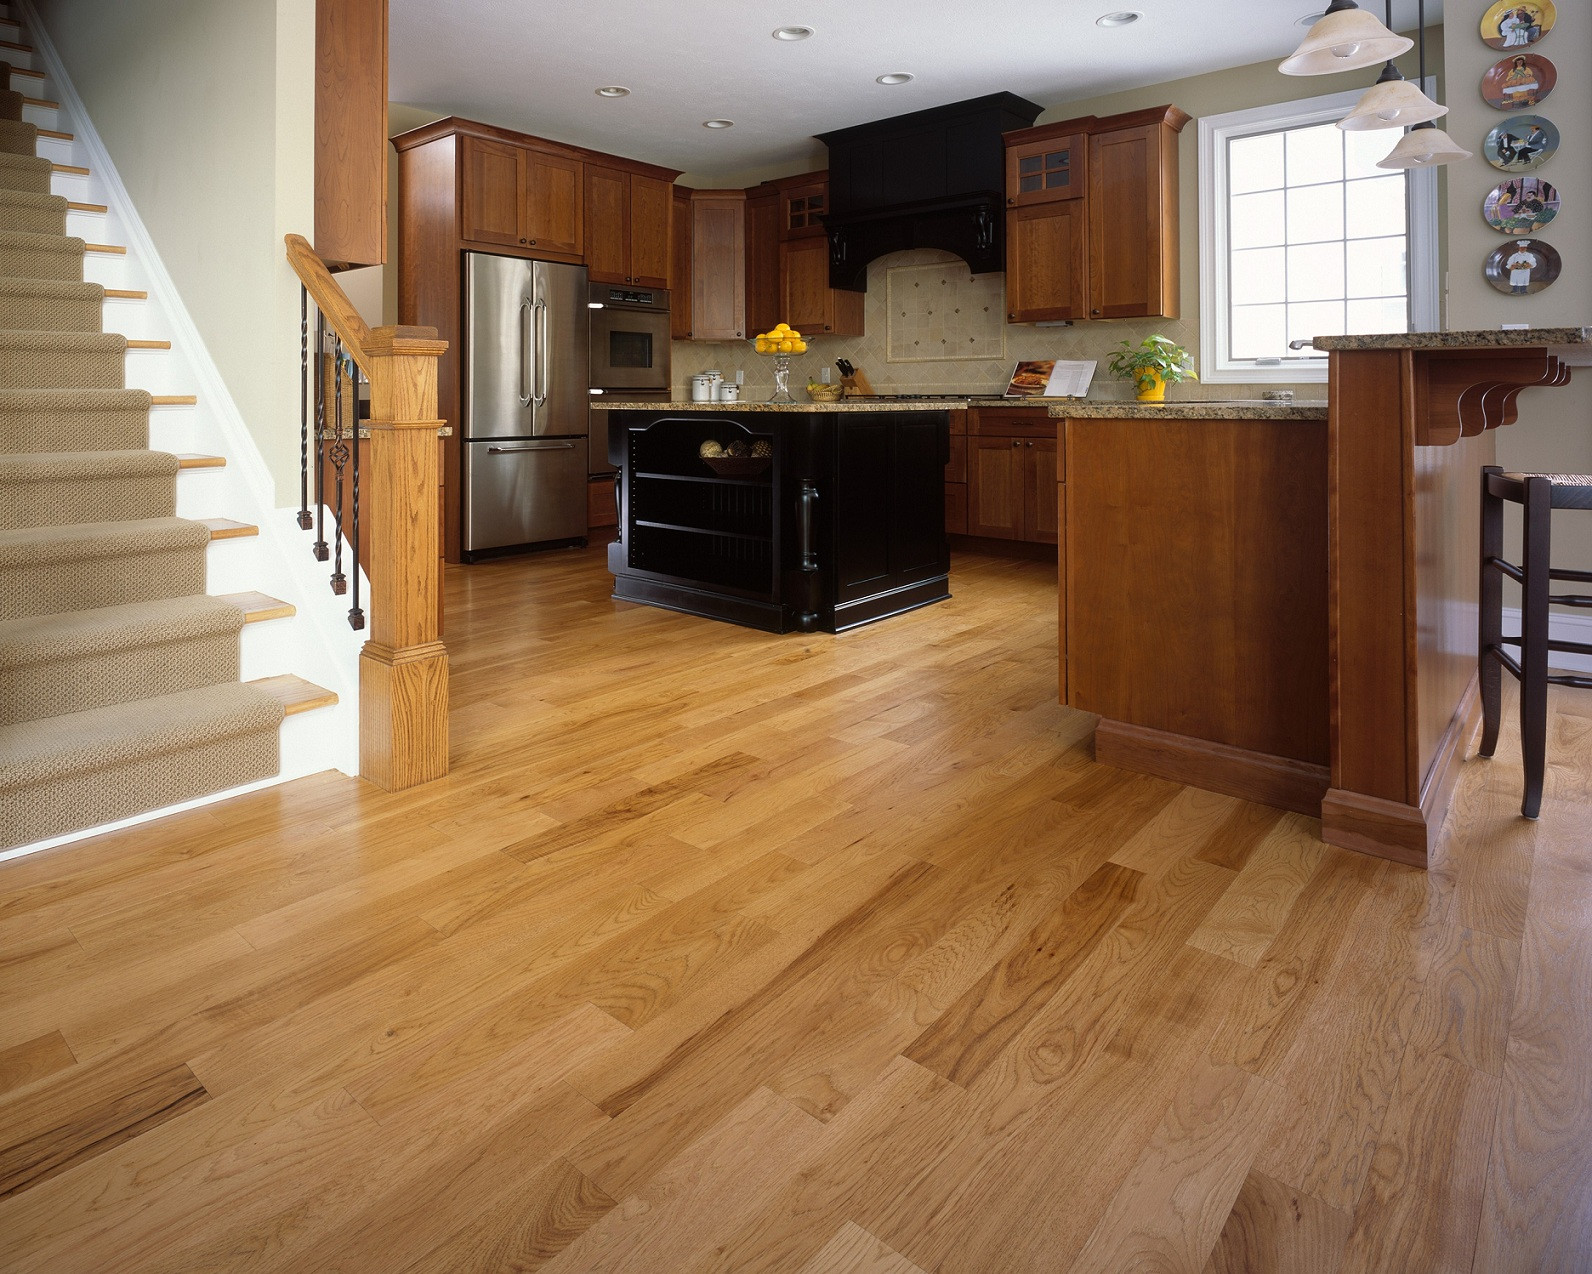 30 Trendy Hardwood Floors with Dark Cabinets 2023 free download hardwood floors with dark cabinets of white kitchen cabinets with brazilian cherry floors new kitchen for fabulous what color wood floor goes with mahogany furniture is best for dark cabinet